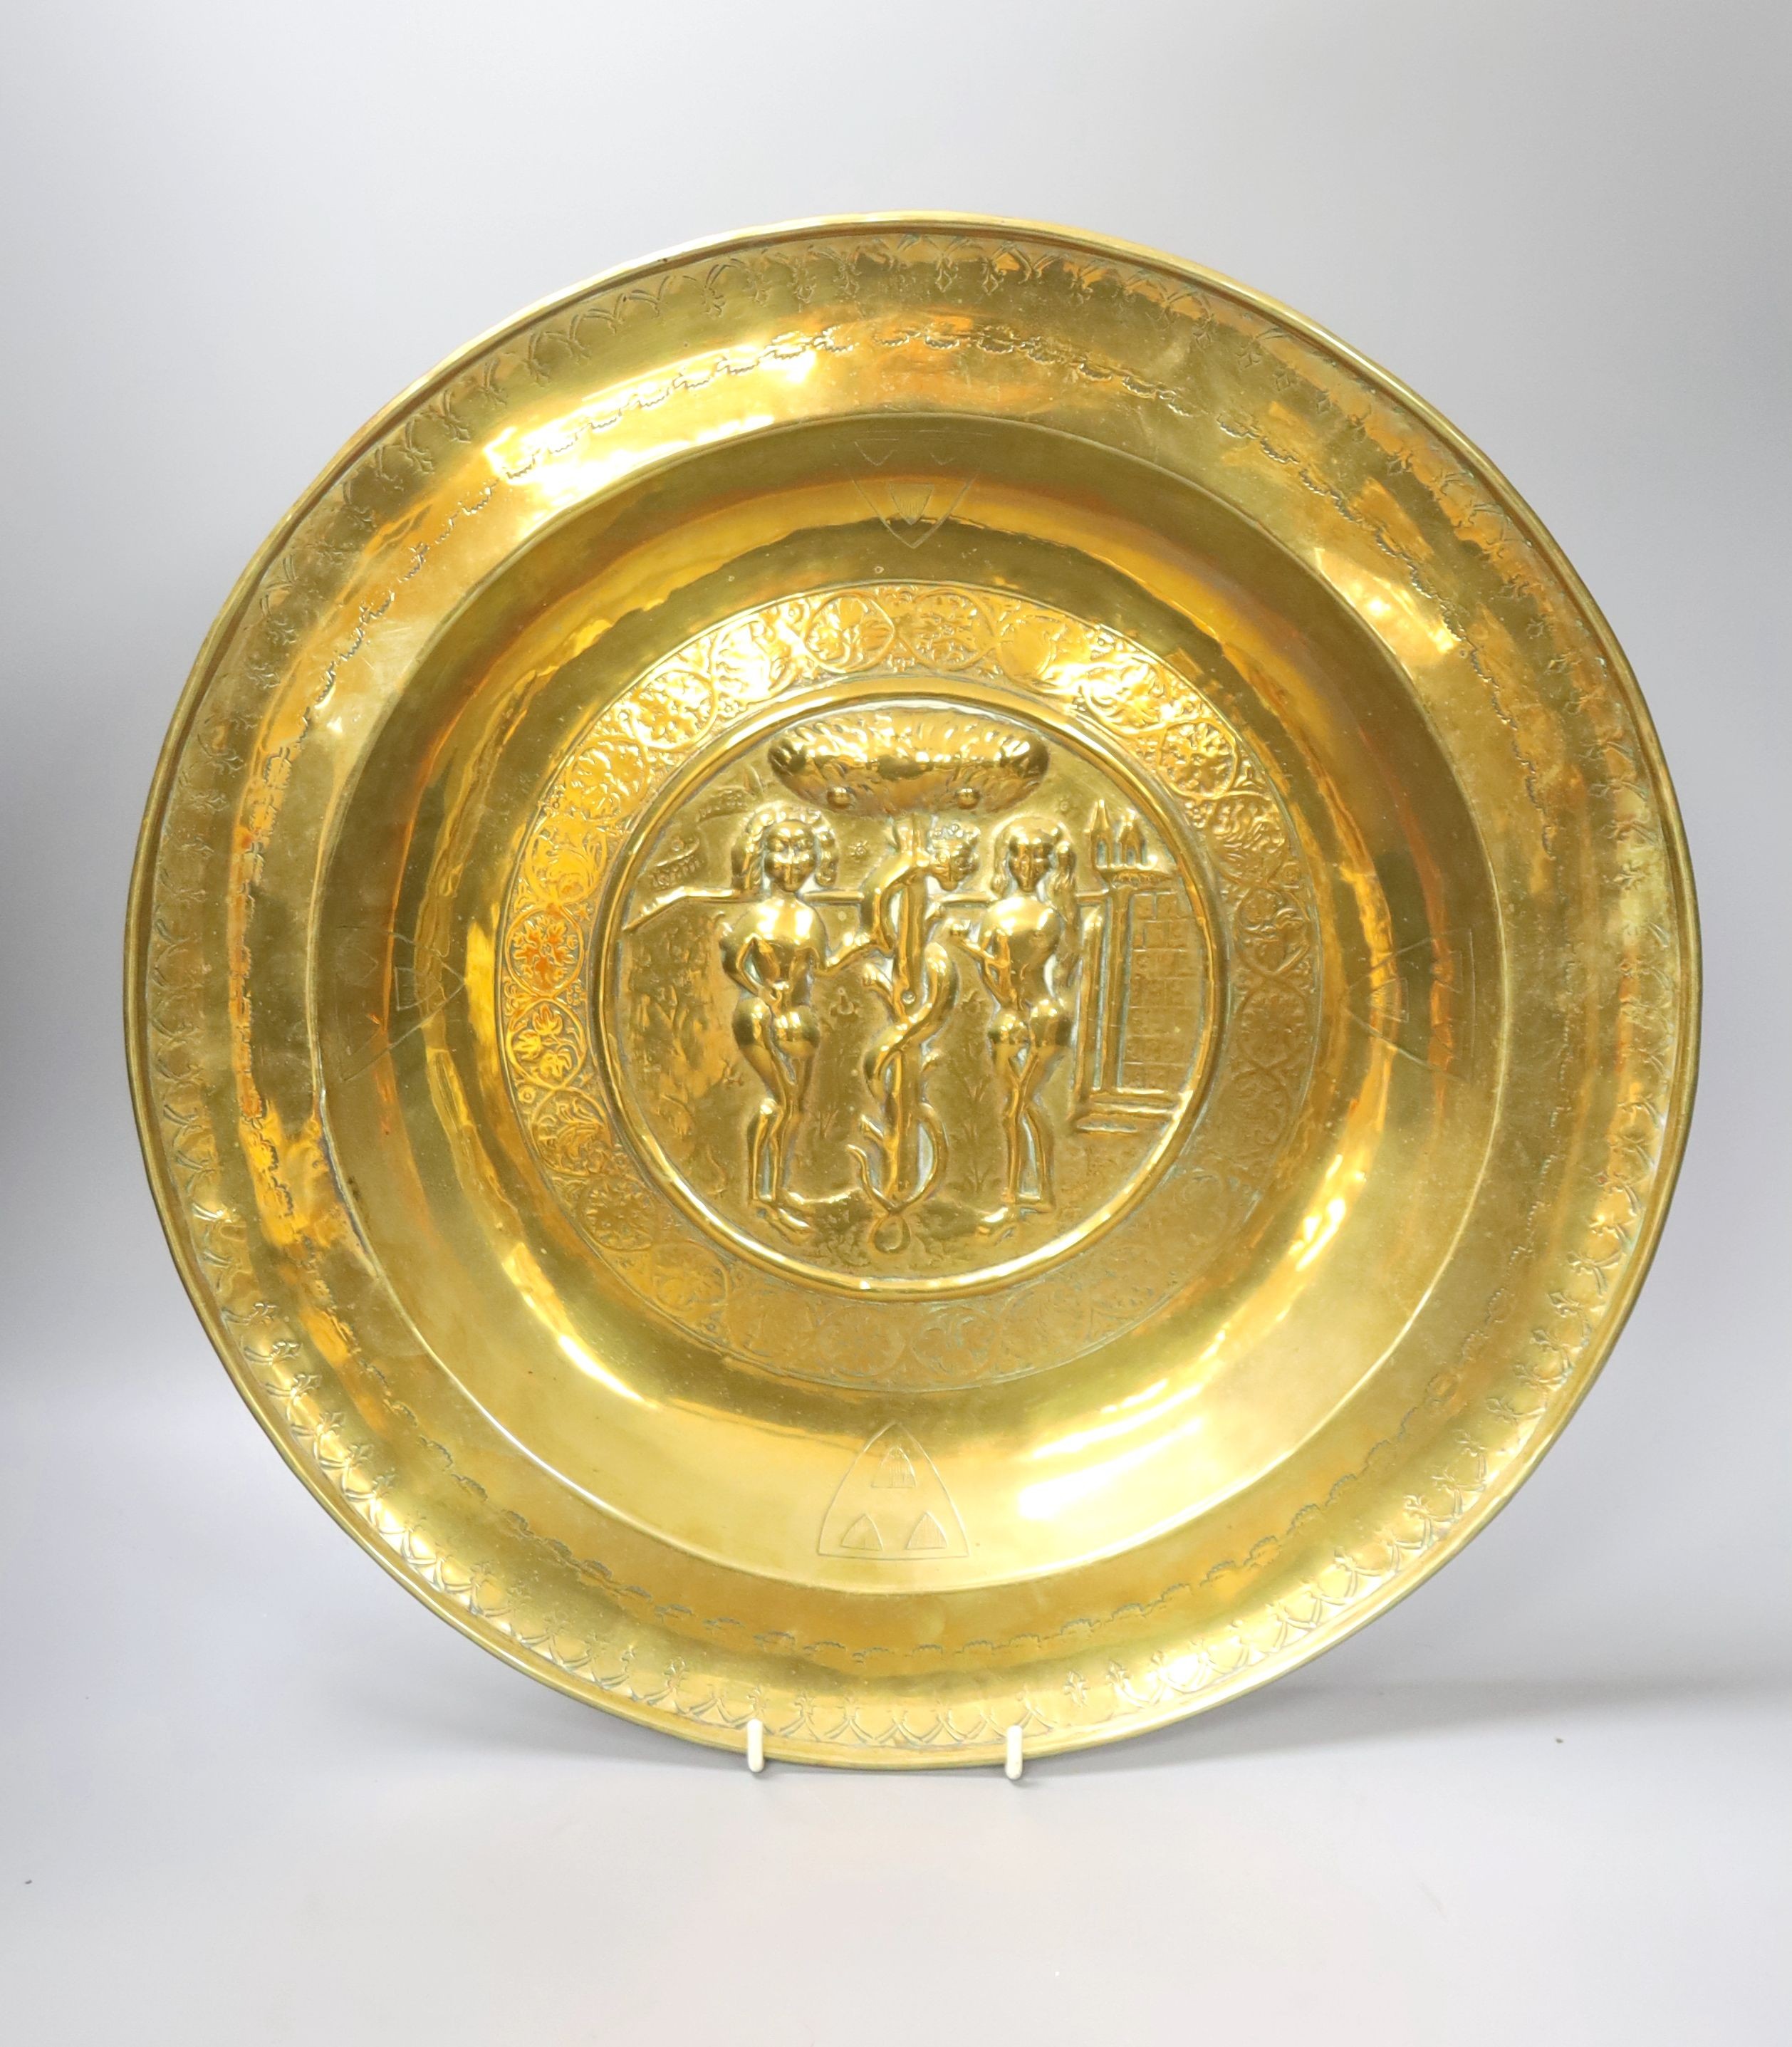 A large Nuremberg brass alms dish, 17th century, depicting Adam and Eve within a twisted foliate and floral border, with stylised armorial shields, 42cm